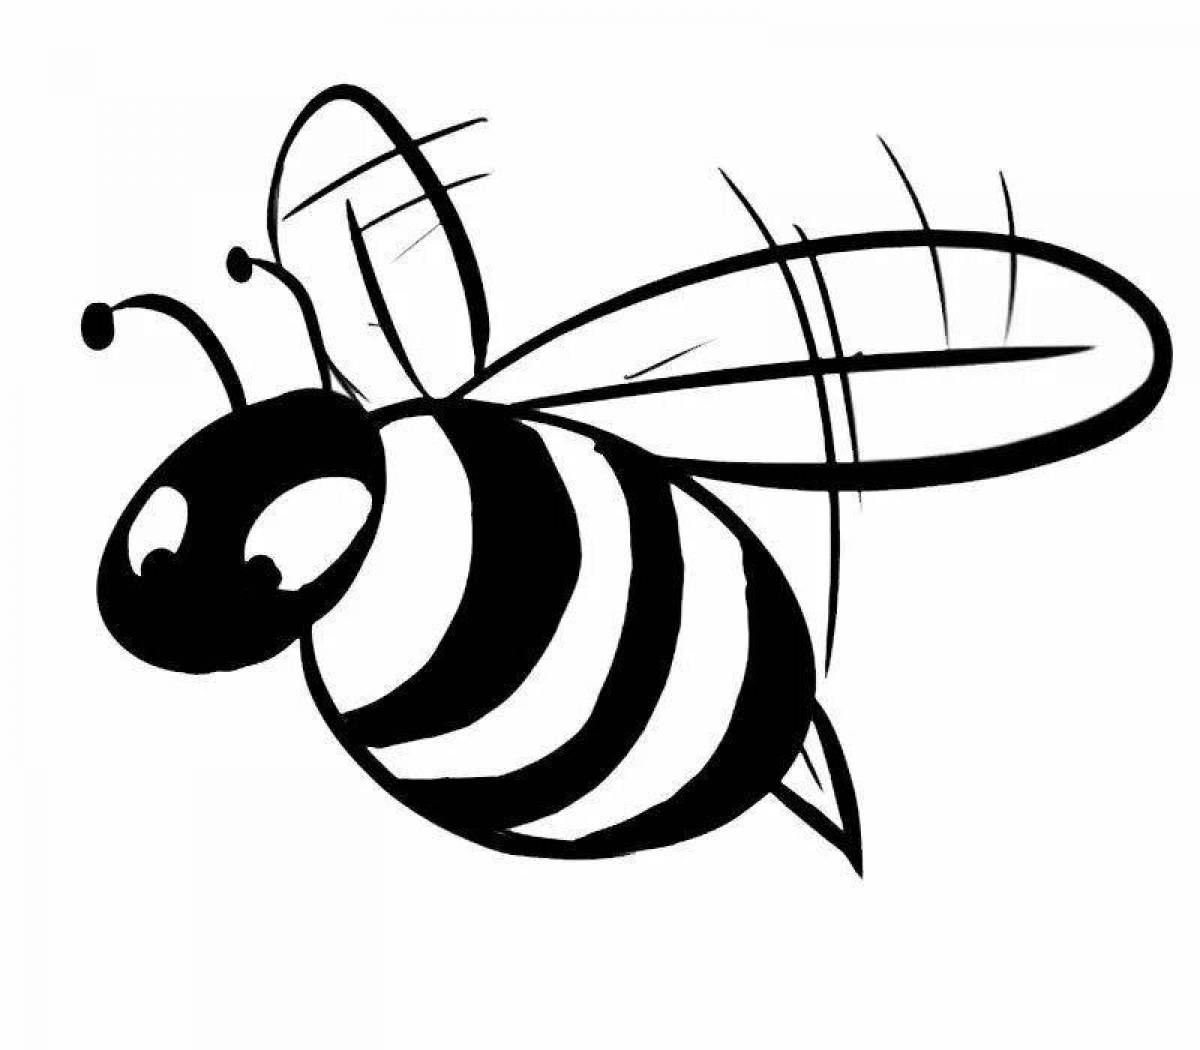 Outstanding wasp coloring page for kids